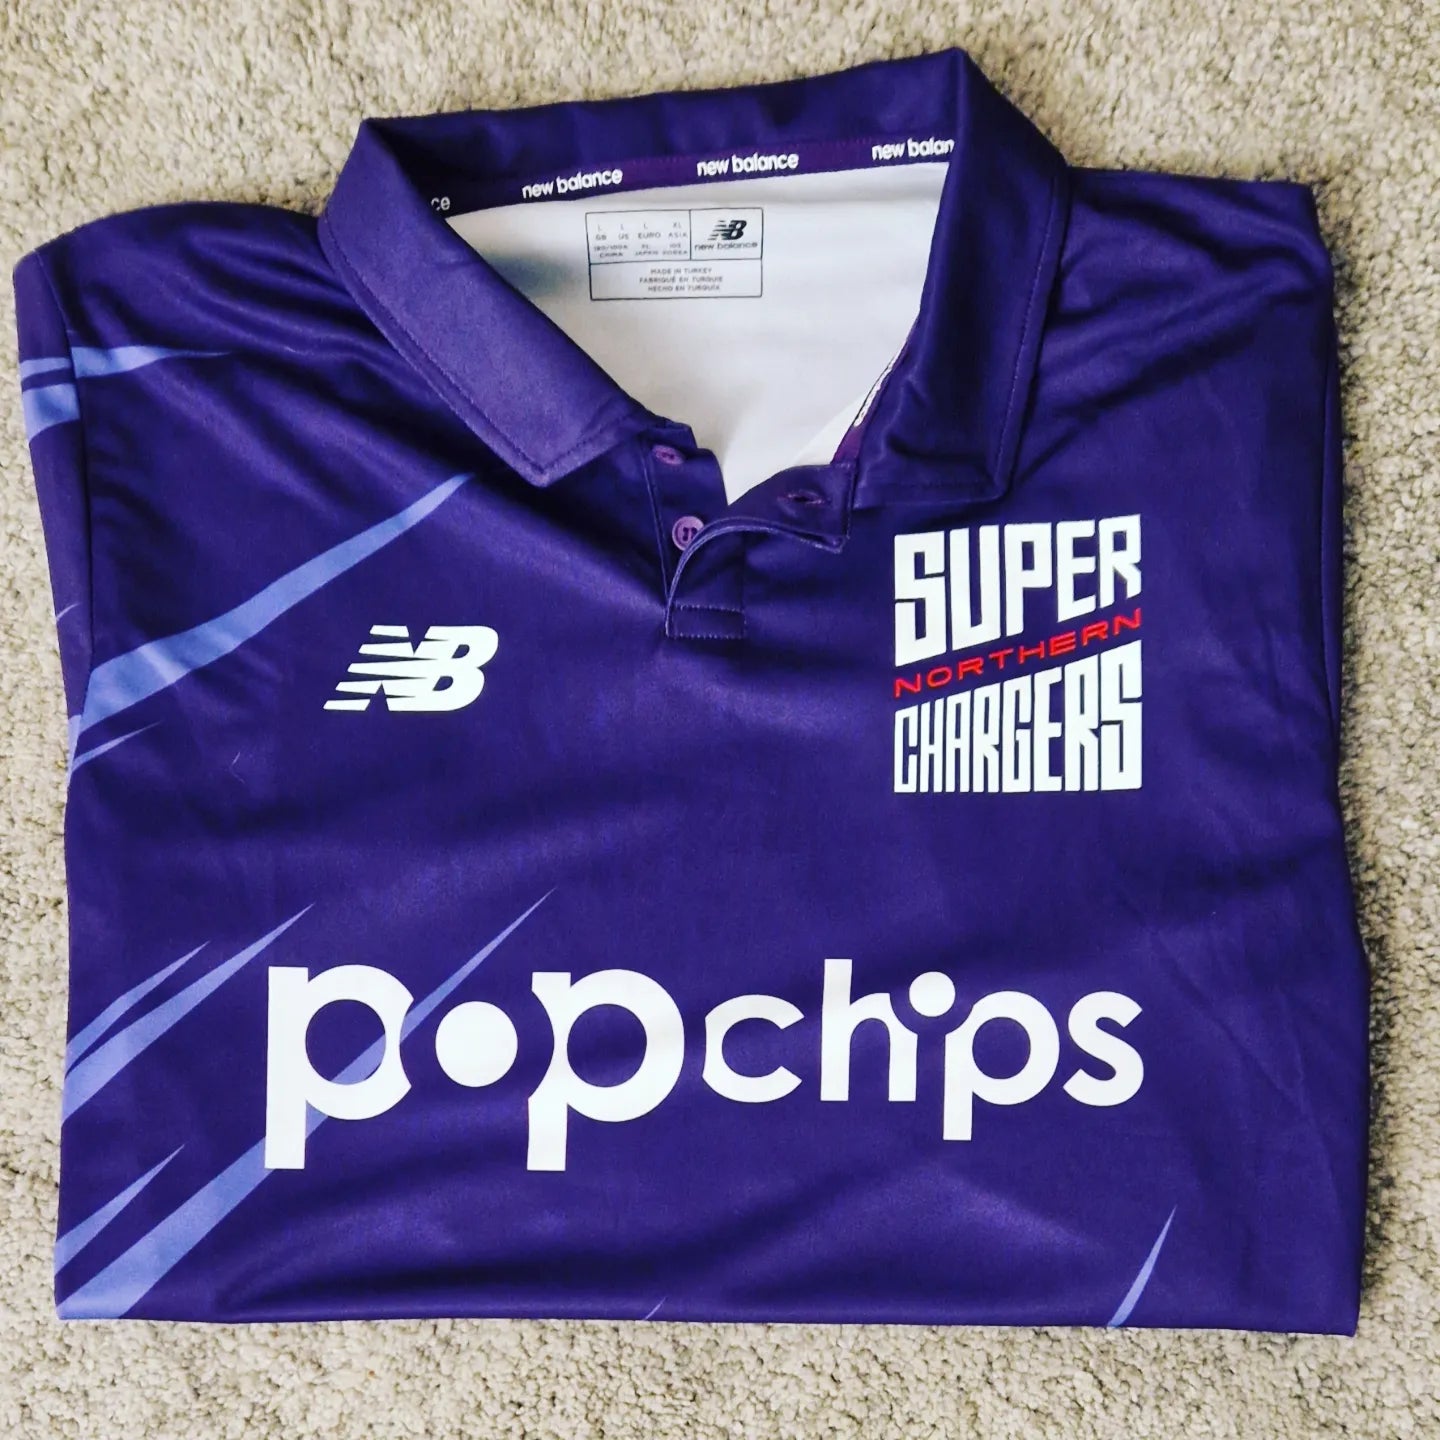 Northern Superchargers Match Jersey